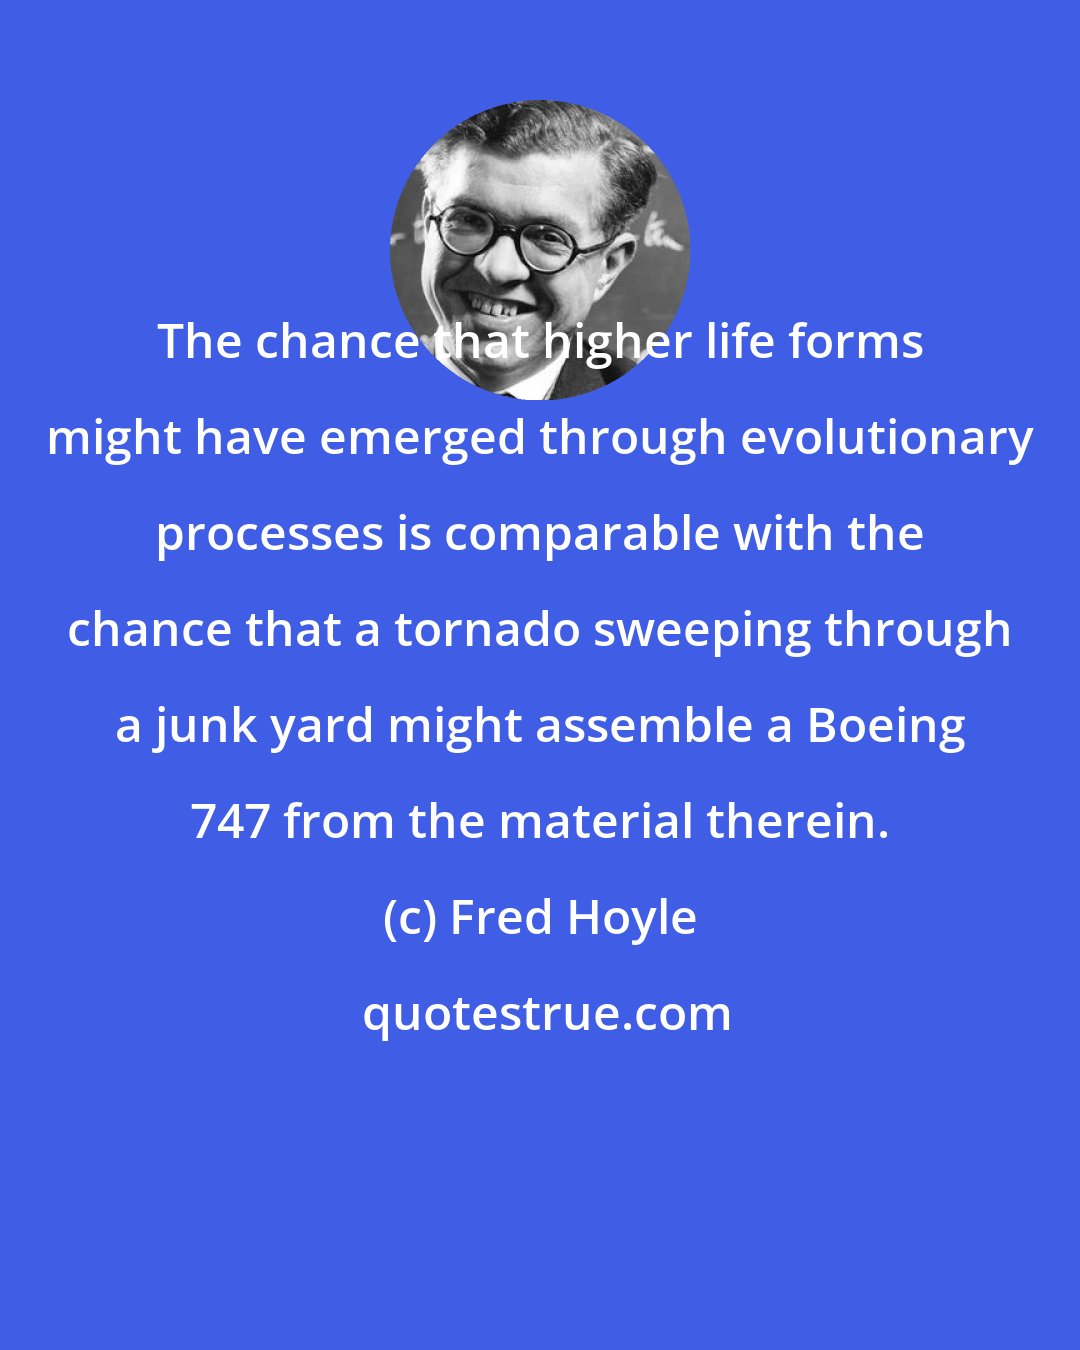 Fred Hoyle: The chance that higher life forms might have emerged through evolutionary processes is comparable with the chance that a tornado sweeping through a junk yard might assemble a Boeing 747 from the material therein.